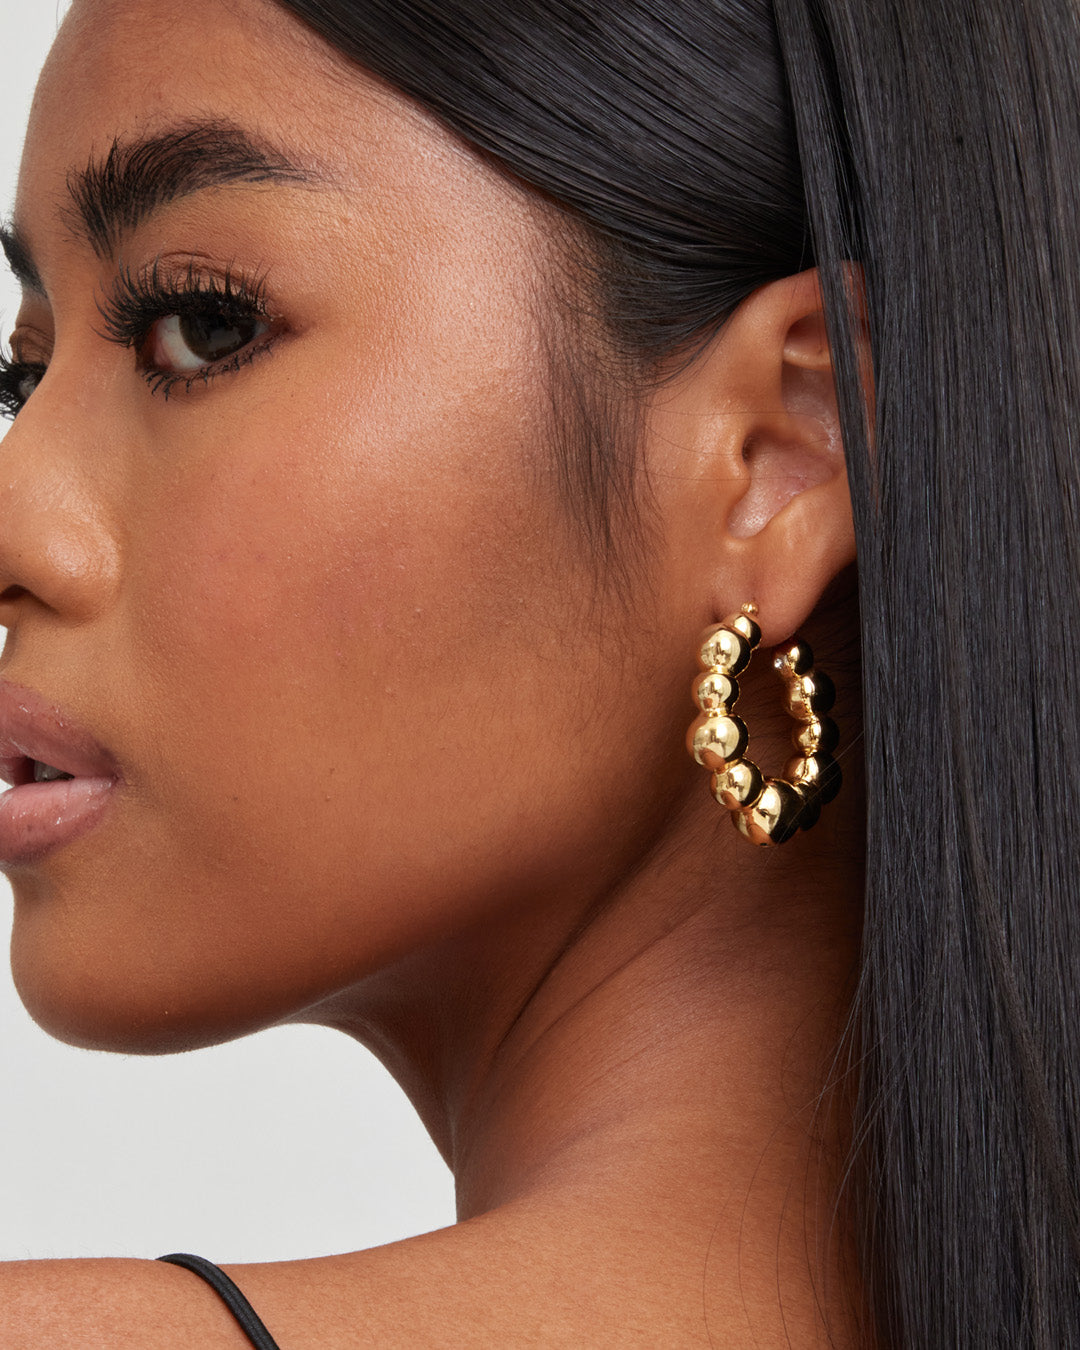 This is the product picture of a chunky style hoop that has a uneven organic bubbles shape earrings plated in gold in sterling silver material